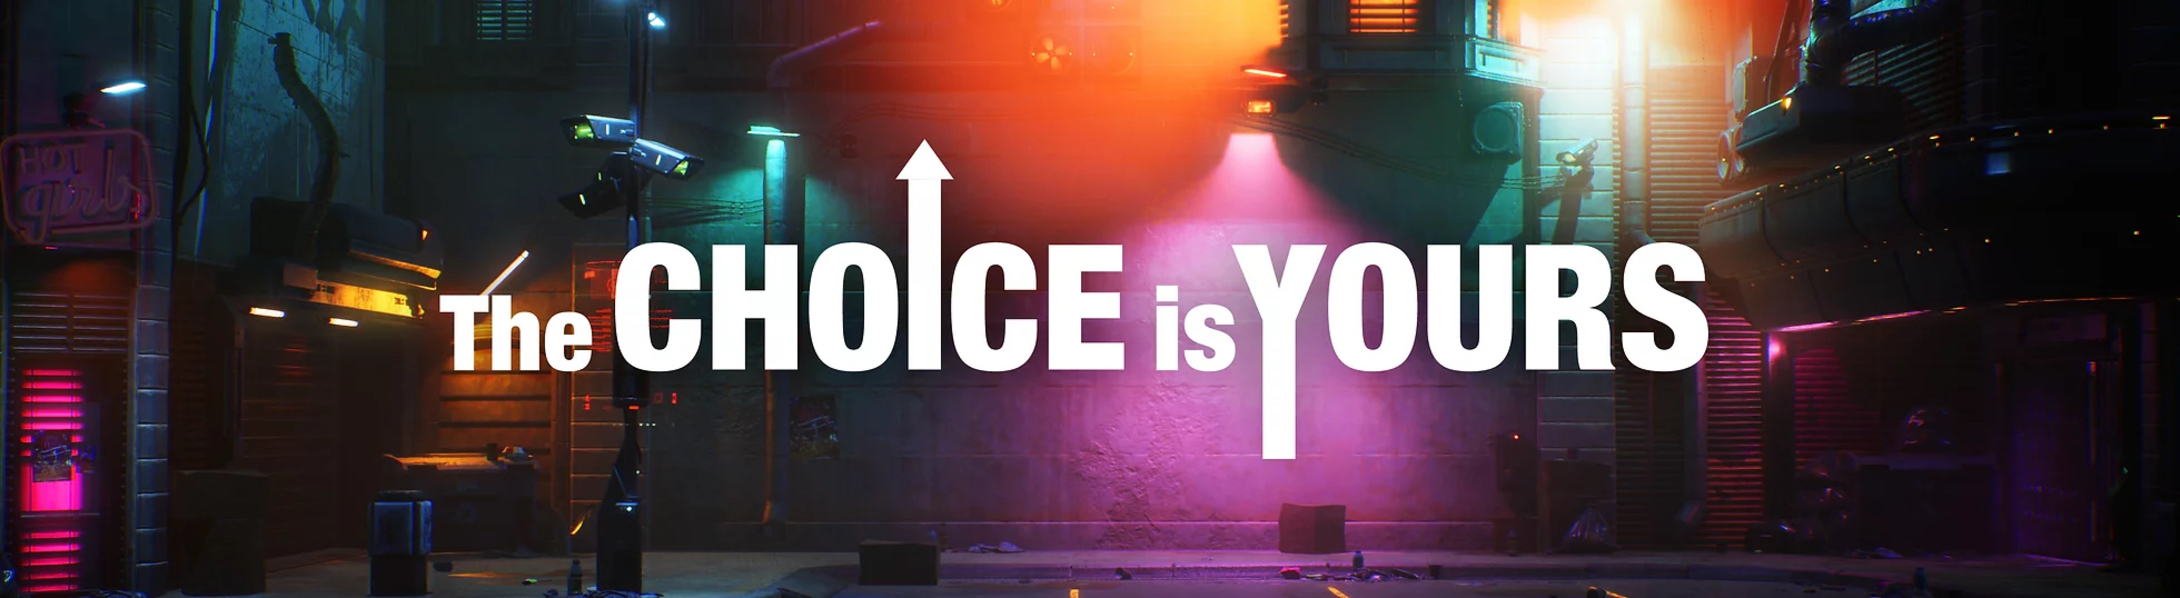 Hologram Theater: “The CHOICE is YOURS” 